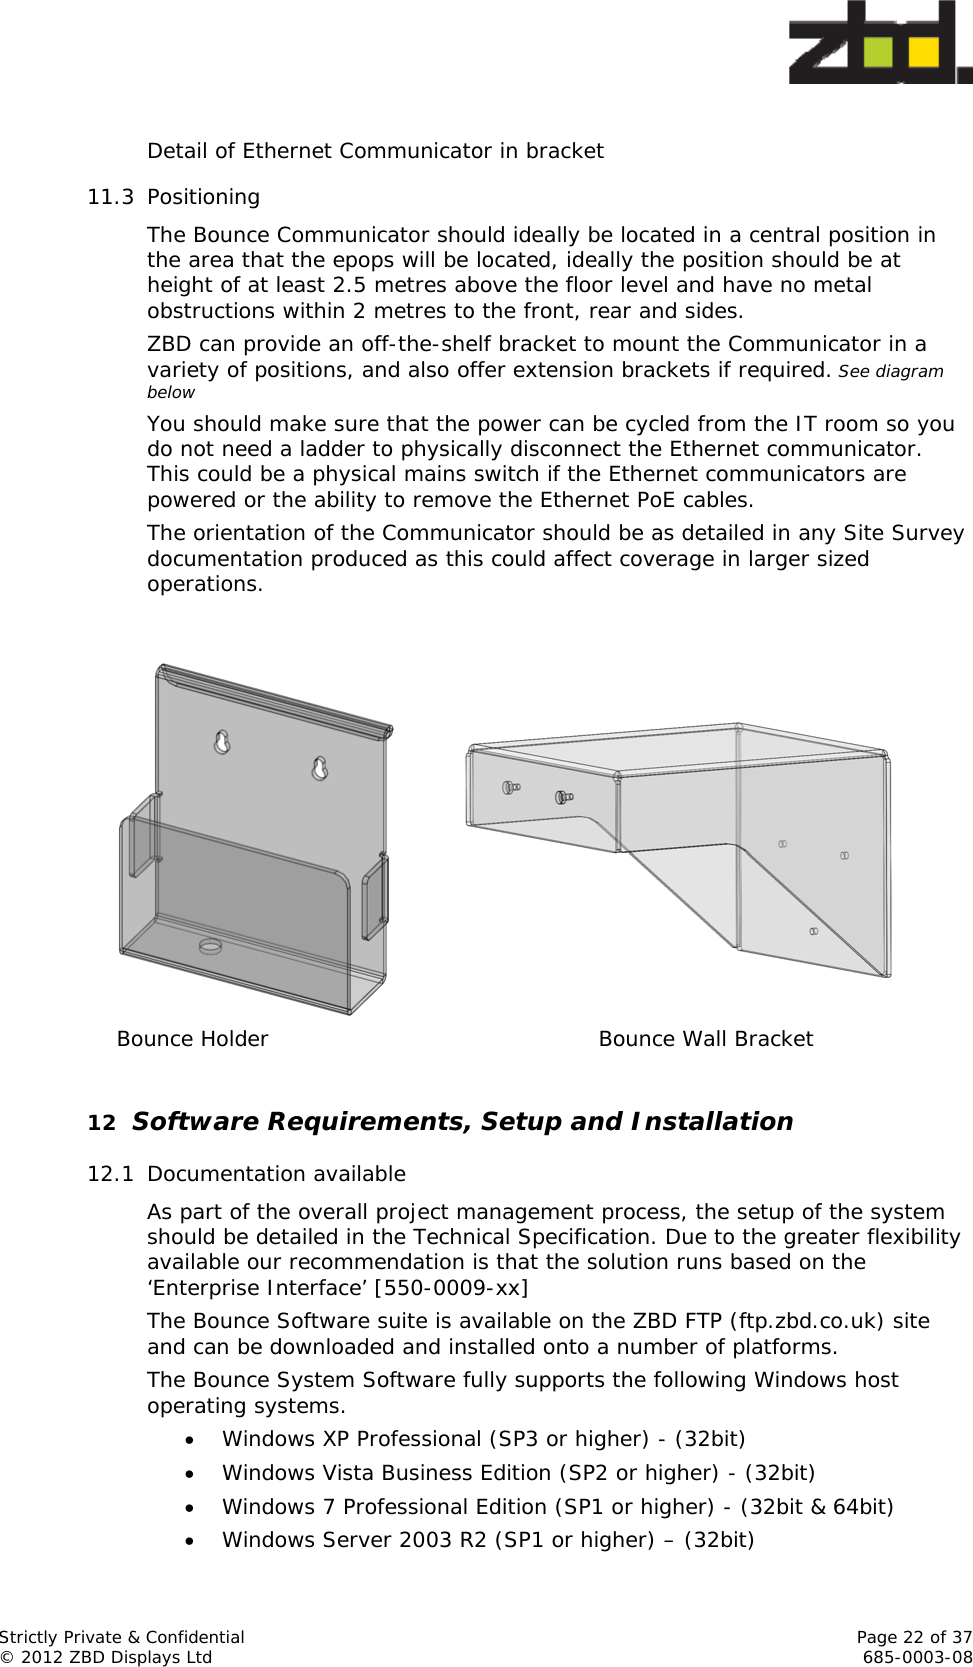  Strictly Private &amp; Confidential    Page 22 of 37 © 2012 ZBD Displays Ltd     685-0003-08  Detail of Ethernet Communicator in bracket 11.3 Positioning The Bounce Communicator should ideally be located in a central position in the area that the epops will be located, ideally the position should be at height of at least 2.5 metres above the floor level and have no metal obstructions within 2 metres to the front, rear and sides.  ZBD can provide an off-the-shelf bracket to mount the Communicator in a variety of positions, and also offer extension brackets if required. See diagram below You should make sure that the power can be cycled from the IT room so you do not need a ladder to physically disconnect the Ethernet communicator. This could be a physical mains switch if the Ethernet communicators are powered or the ability to remove the Ethernet PoE cables. The orientation of the Communicator should be as detailed in any Site Survey documentation produced as this could affect coverage in larger sized operations.     Bounce Holder     Bounce Wall Bracket  12 Software Requirements, Setup and Installation 12.1 Documentation available As part of the overall project management process, the setup of the system should be detailed in the Technical Specification. Due to the greater flexibility available our recommendation is that the solution runs based on the ‘Enterprise Interface’ [550-0009-xx]  The Bounce Software suite is available on the ZBD FTP (ftp.zbd.co.uk) site and can be downloaded and installed onto a number of platforms. The Bounce System Software fully supports the following Windows host operating systems.  Windows XP Professional (SP3 or higher) - (32bit)  Windows Vista Business Edition (SP2 or higher) - (32bit)  Windows 7 Professional Edition (SP1 or higher) - (32bit &amp; 64bit)  Windows Server 2003 R2 (SP1 or higher) – (32bit) 